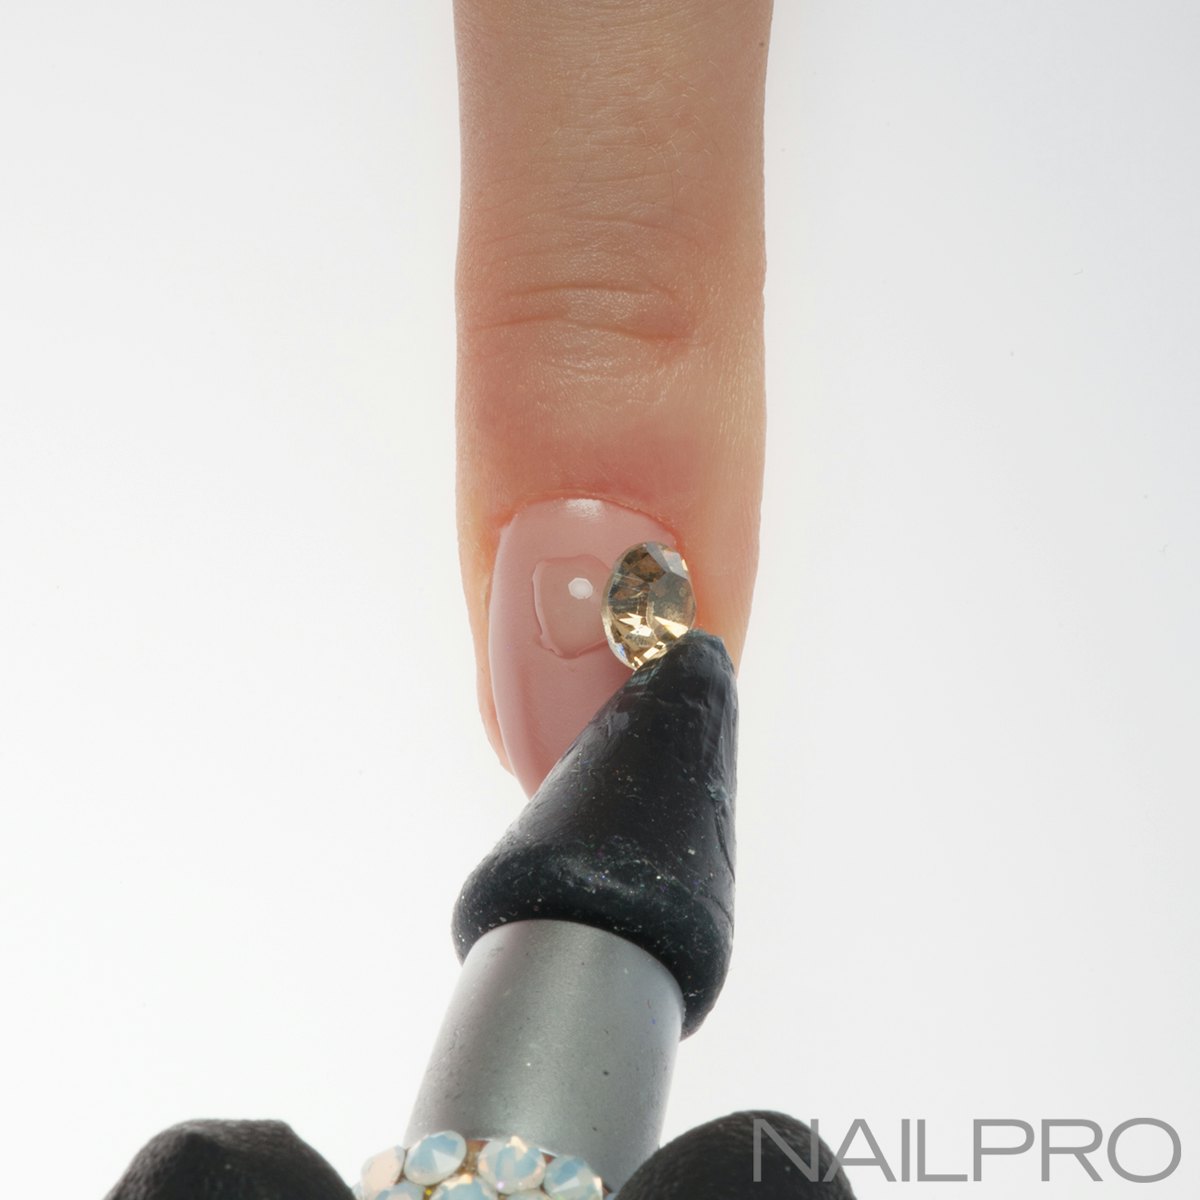 The Best Way to Apply Nail Jewelery